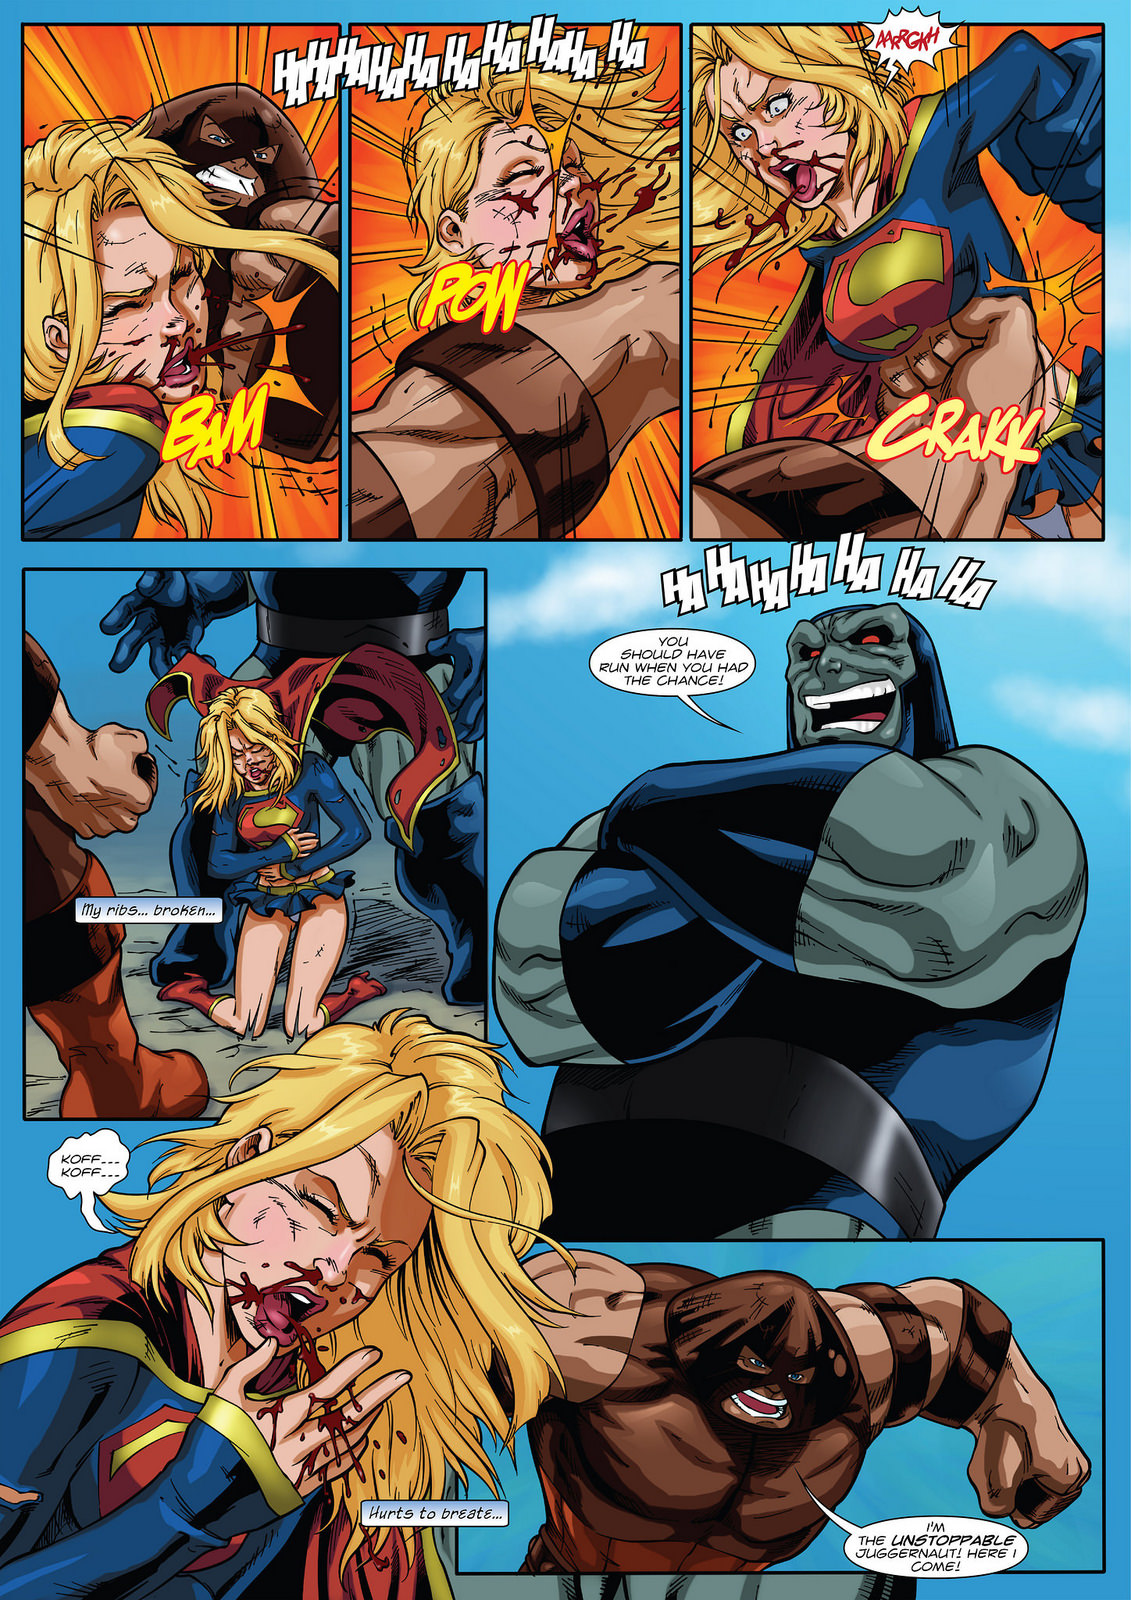 Anon2012-461755-Supergirls_Last_Stand_Page_8.jpg.